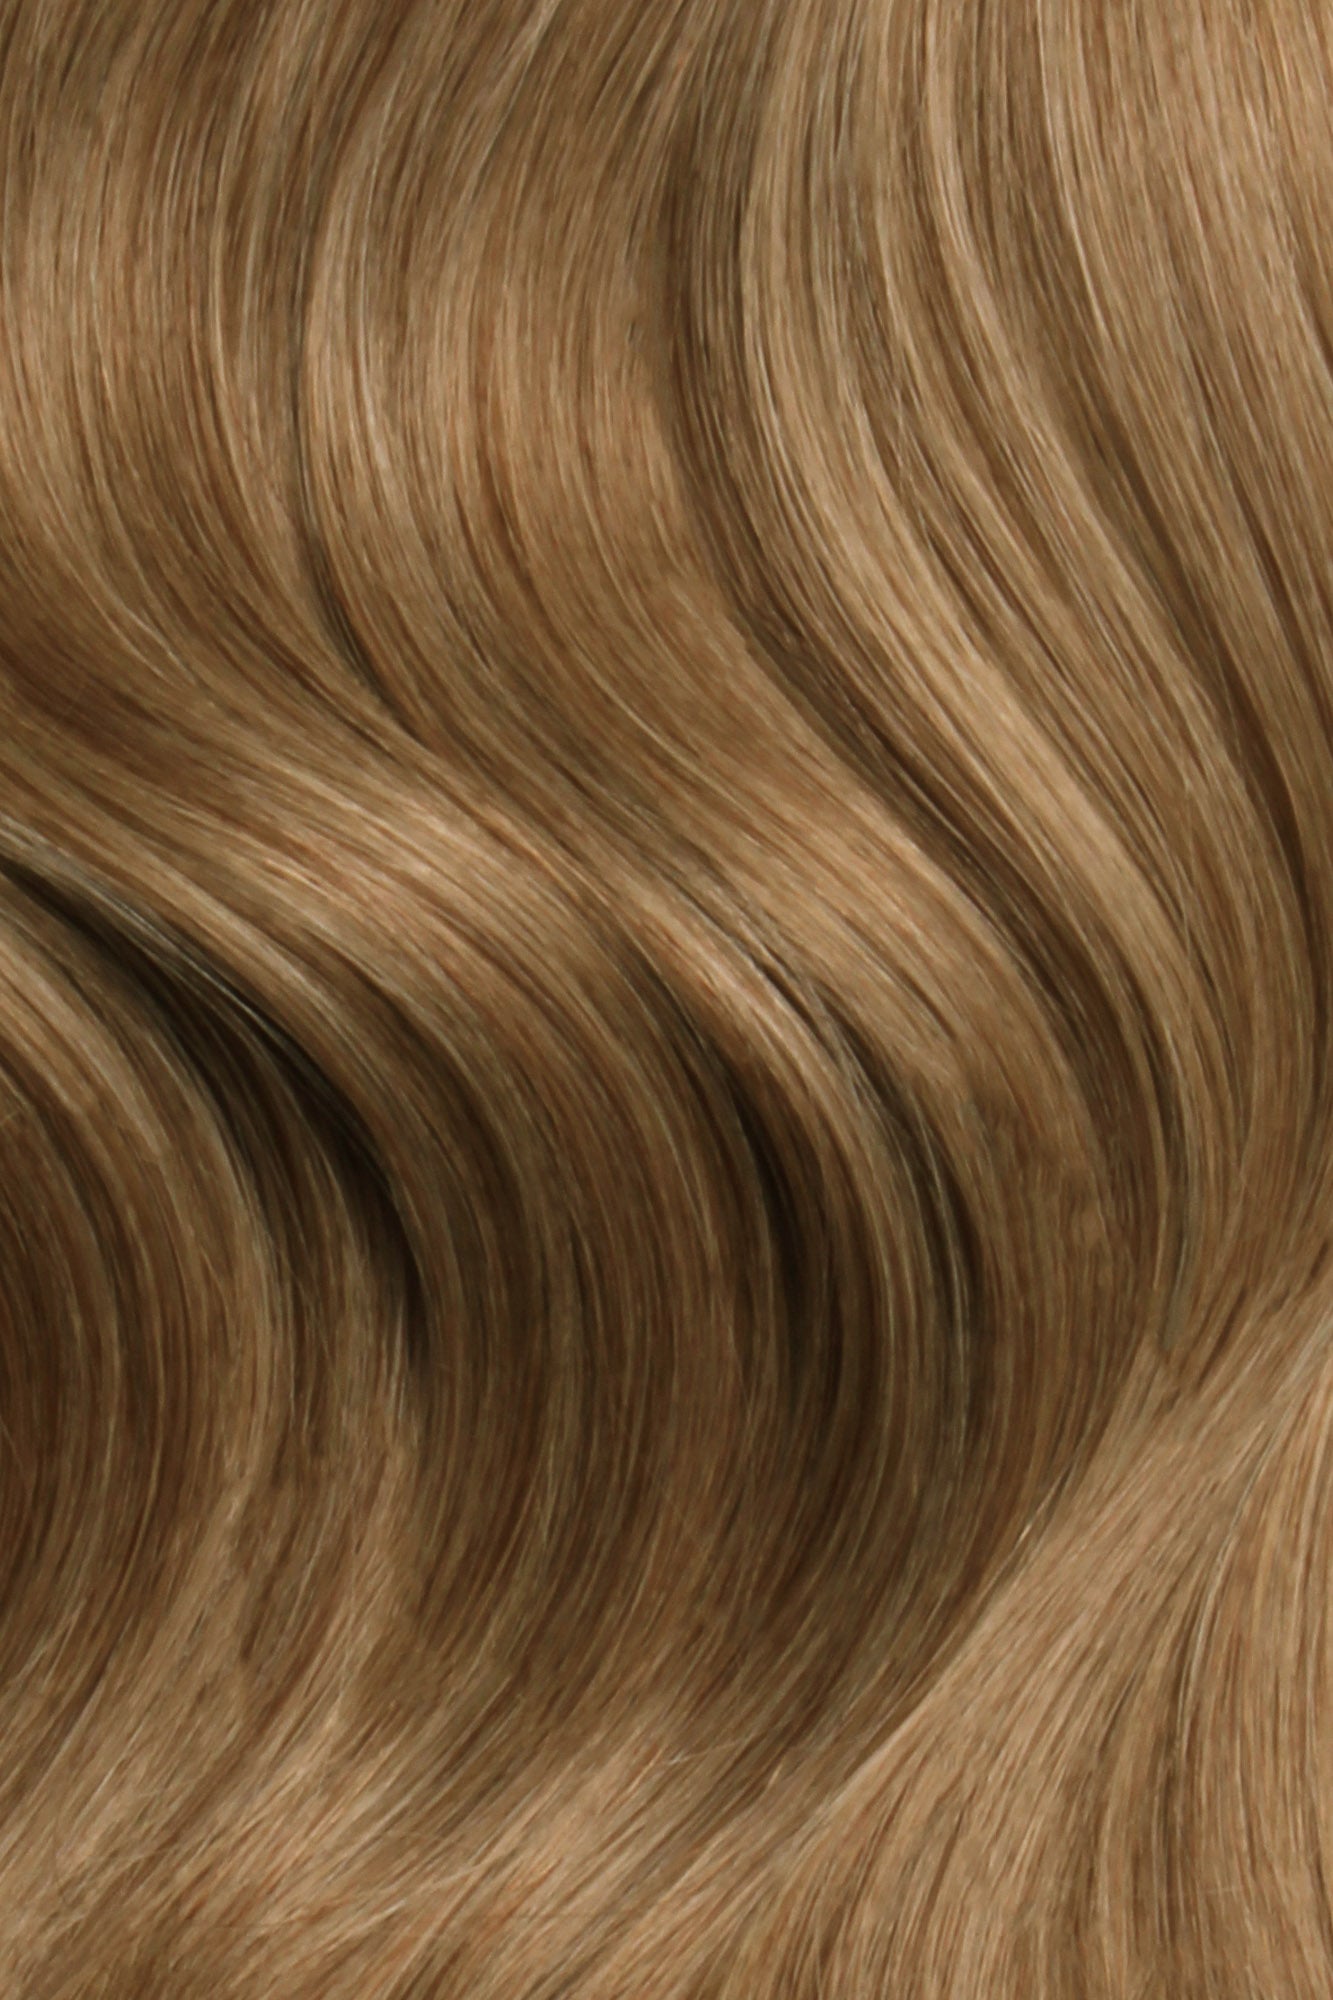 Nano Bonds 24 Inches - SWAY Hair Extensions Chestnut-Blonde-Mix-6-24 Ultra-fine, invisible bonds for a flawless, natural look. 100% Remy Human hair, lightweight and versatile. Reusable and perfect for individual or salon use.